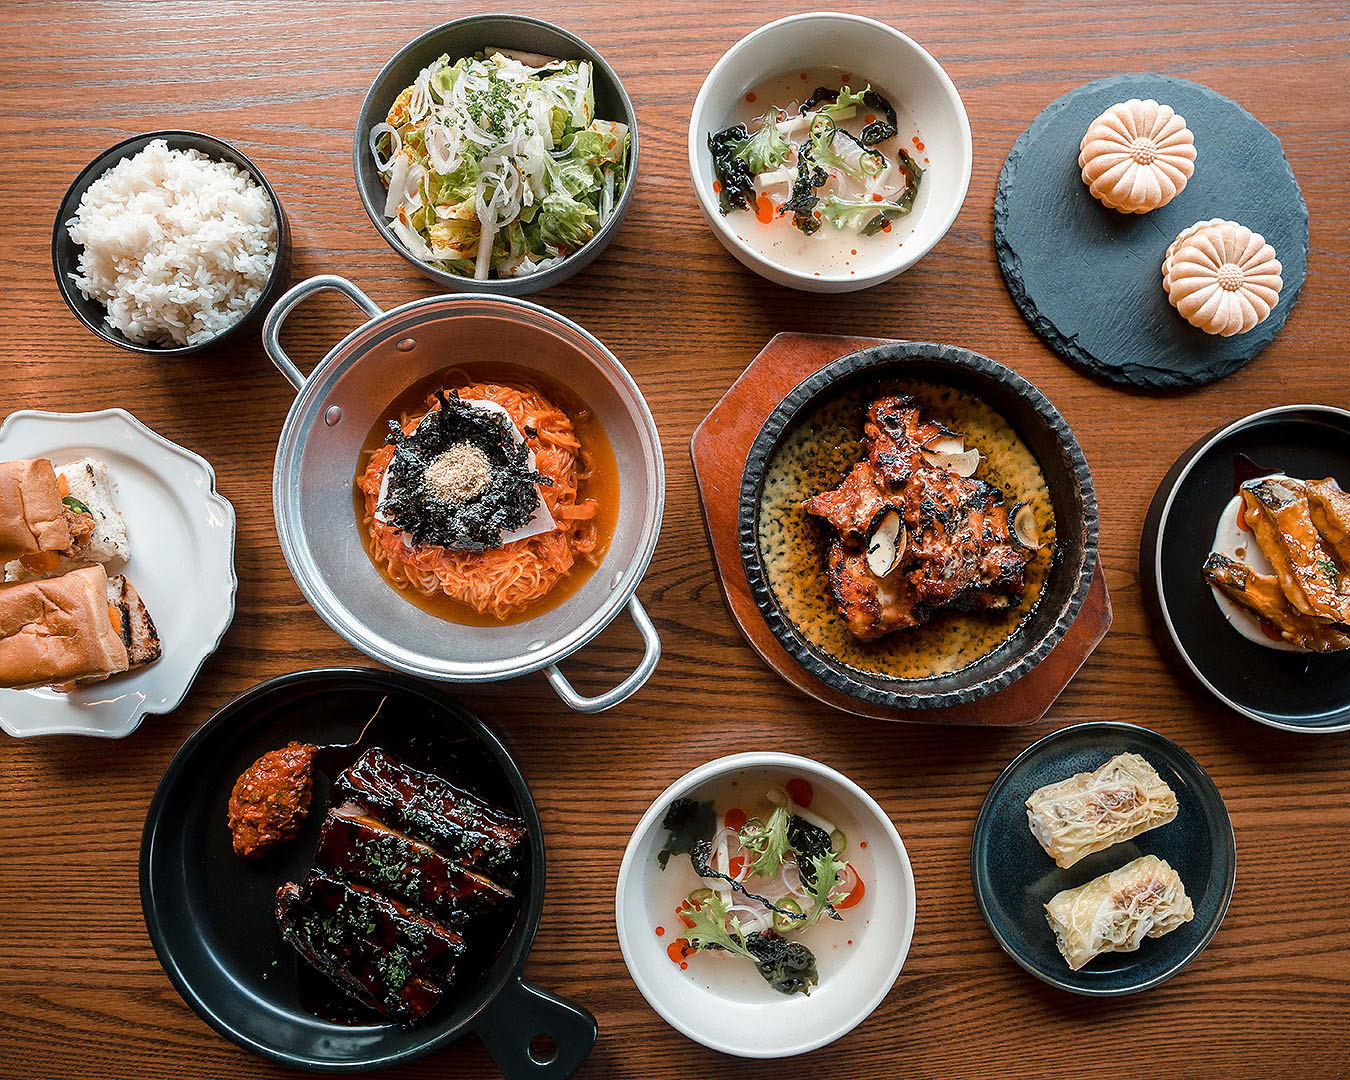 Oodles of dishes on the table at Gochu, one of the best menus at restaurant month.